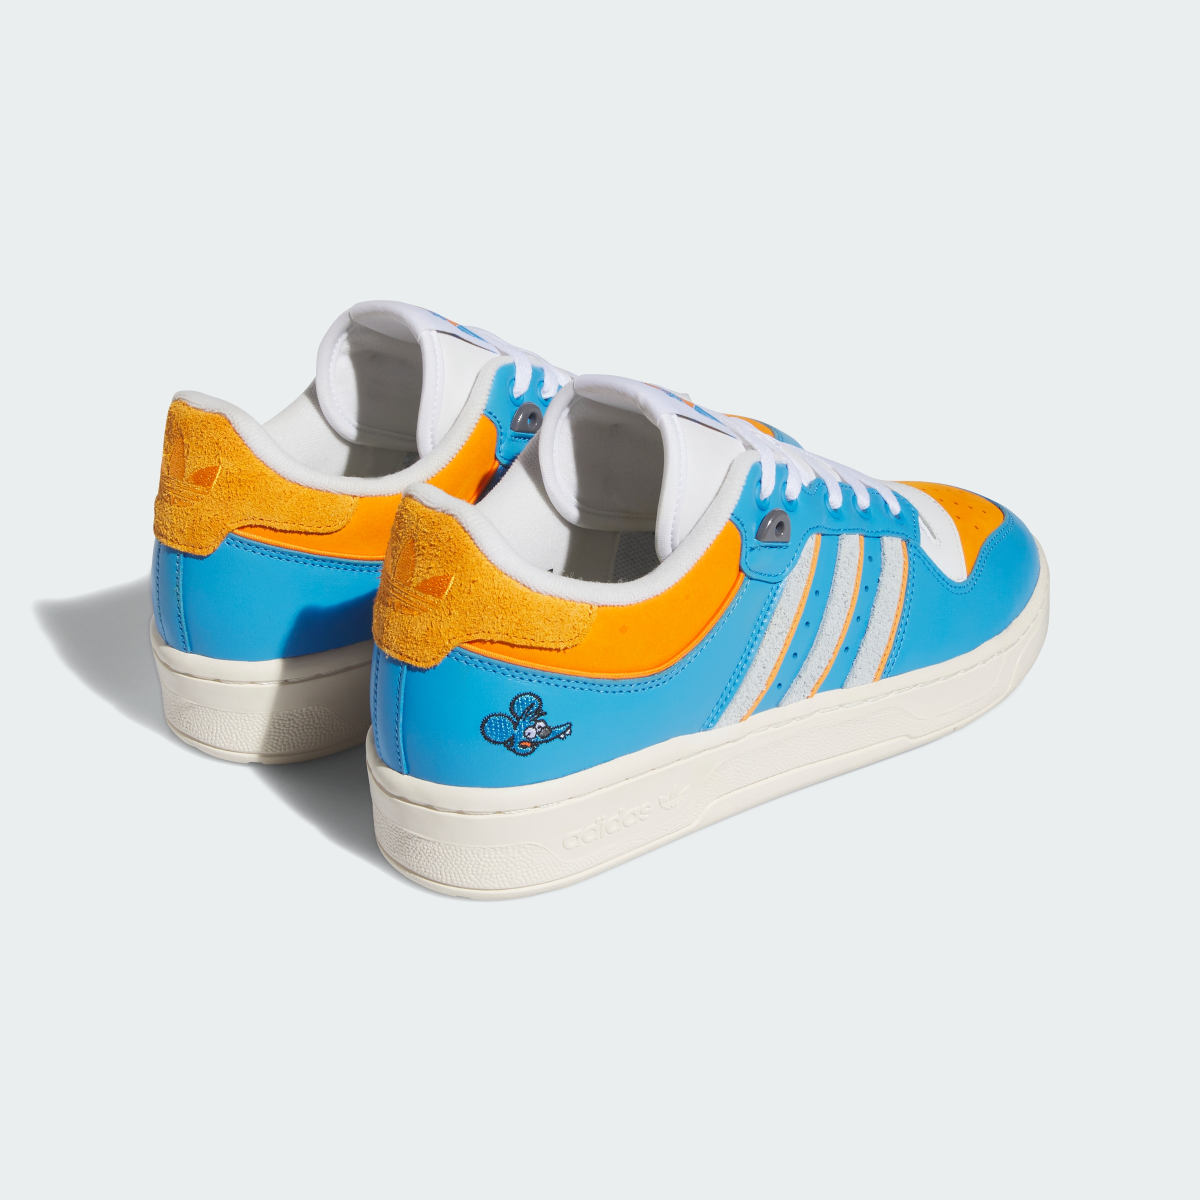 Adidas Rivalry Low Itchy. 8